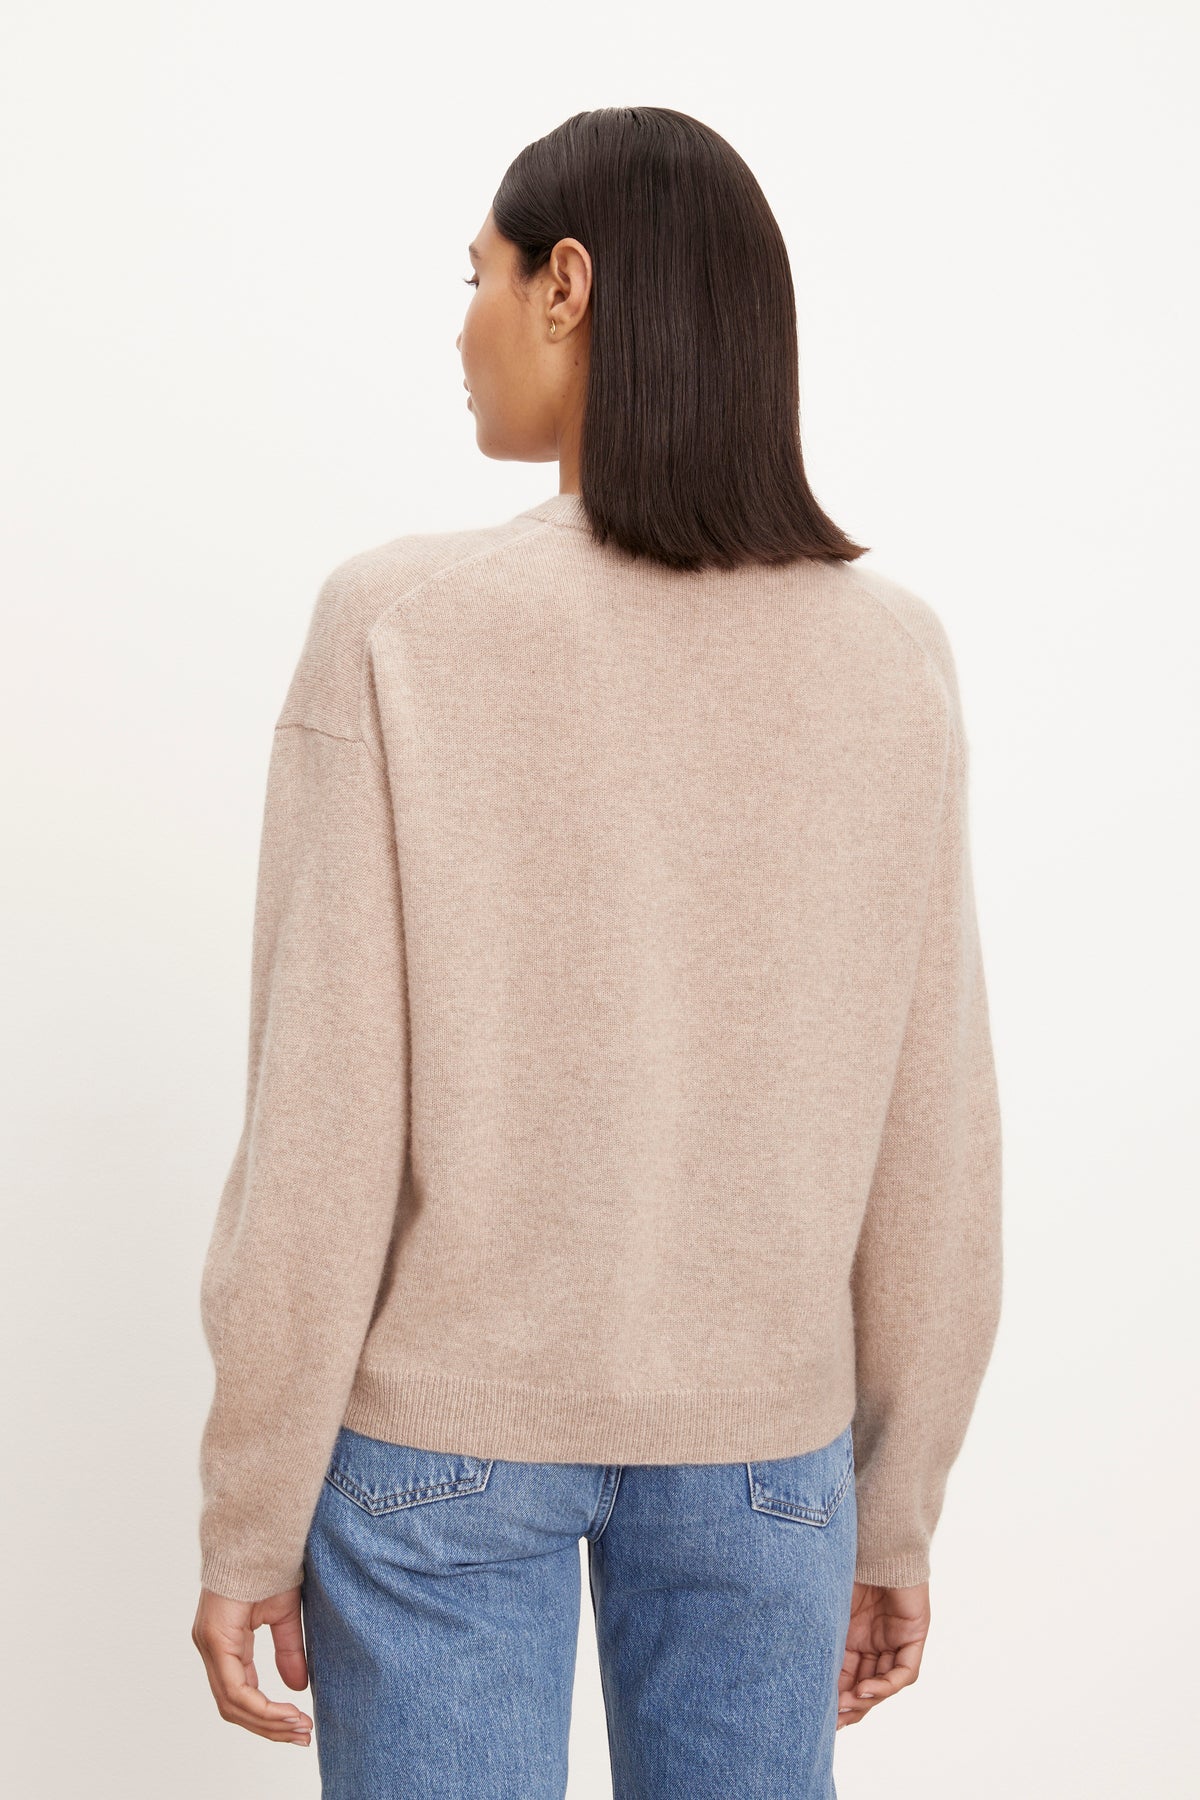 The back view of a woman wearing a Velvet by Graham & Spencer BRYNNE CASHMERE CREW NECK SWEATER and jeans.-26883604578497